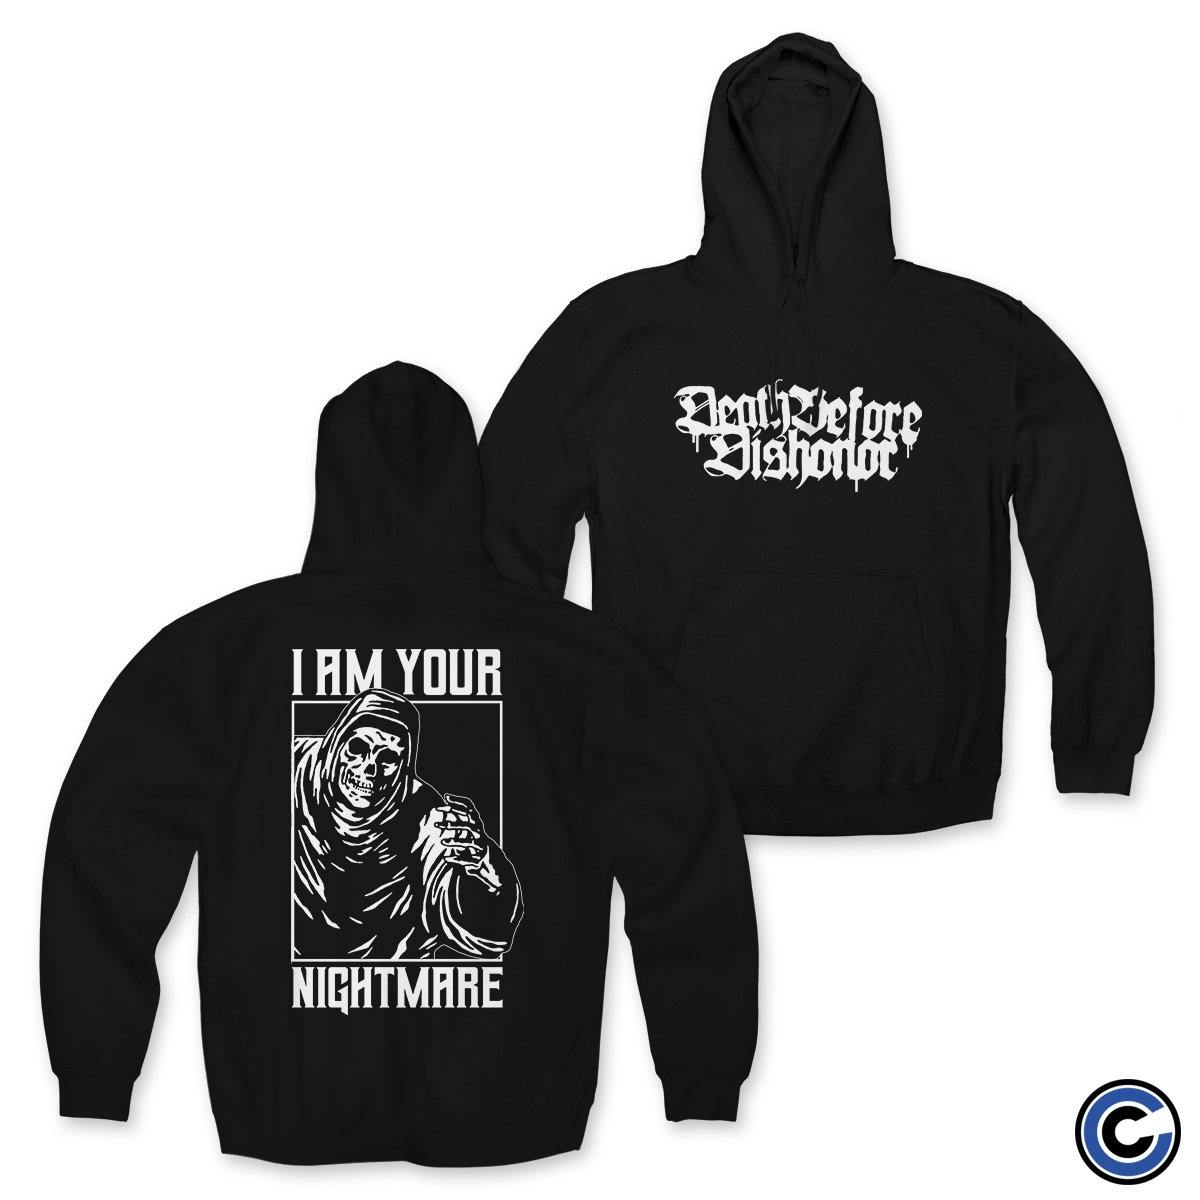 Buy – Death Before Dishonor "Kill The Dream" Hoodie – Band & Music Merch – Cold Cuts Merch